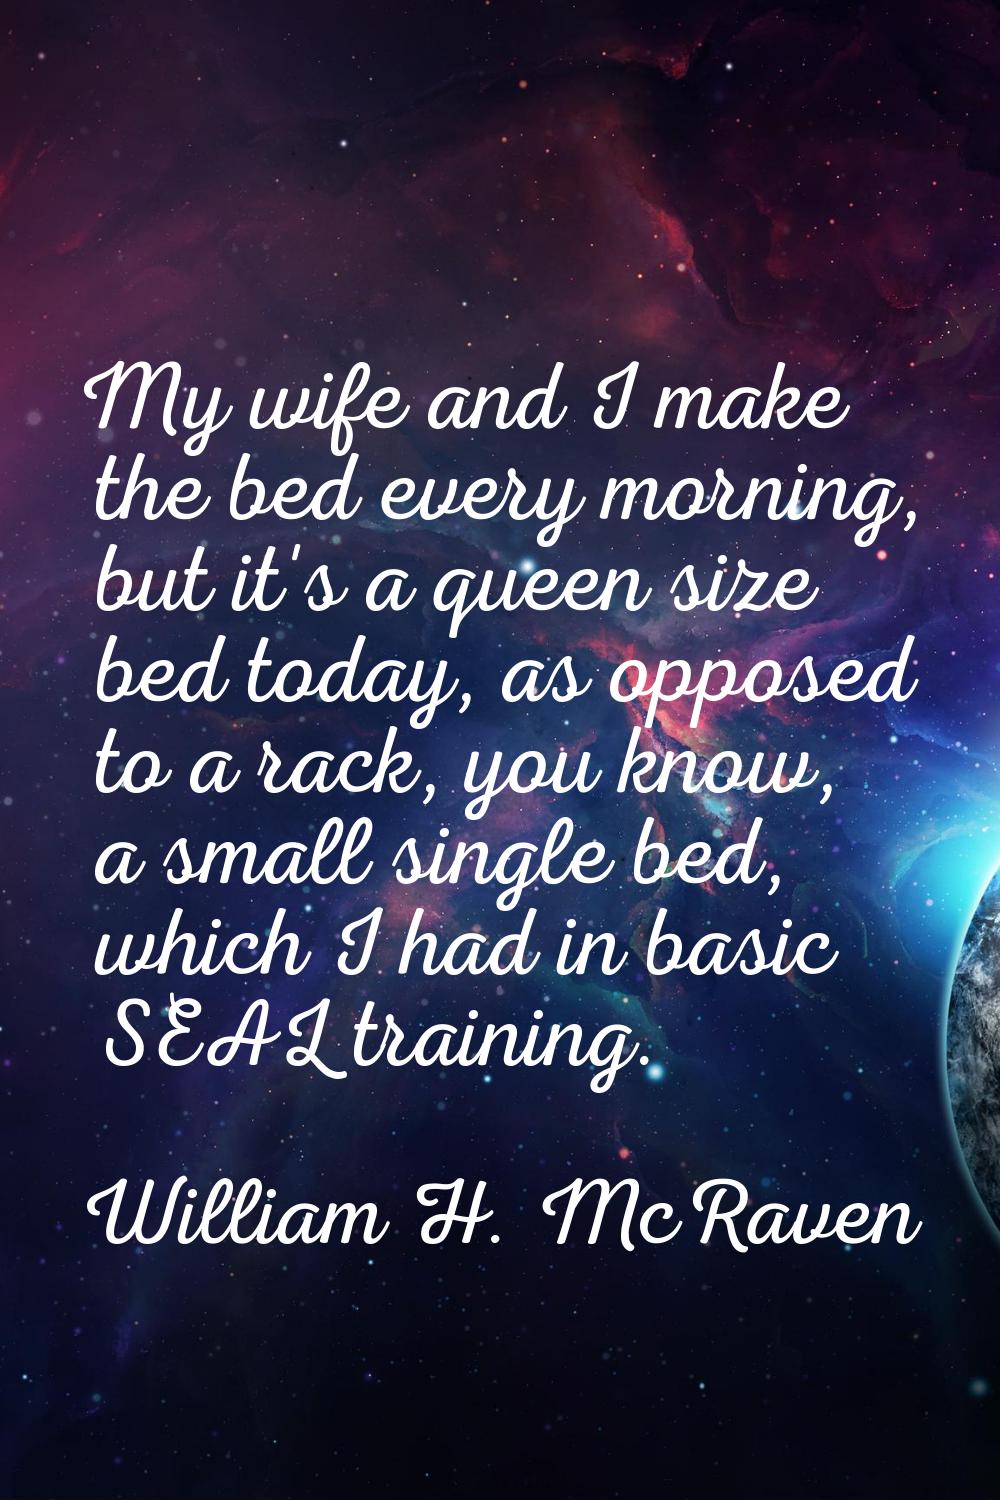 My wife and I make the bed every morning, but it's a queen size bed today, as opposed to a rack, yo